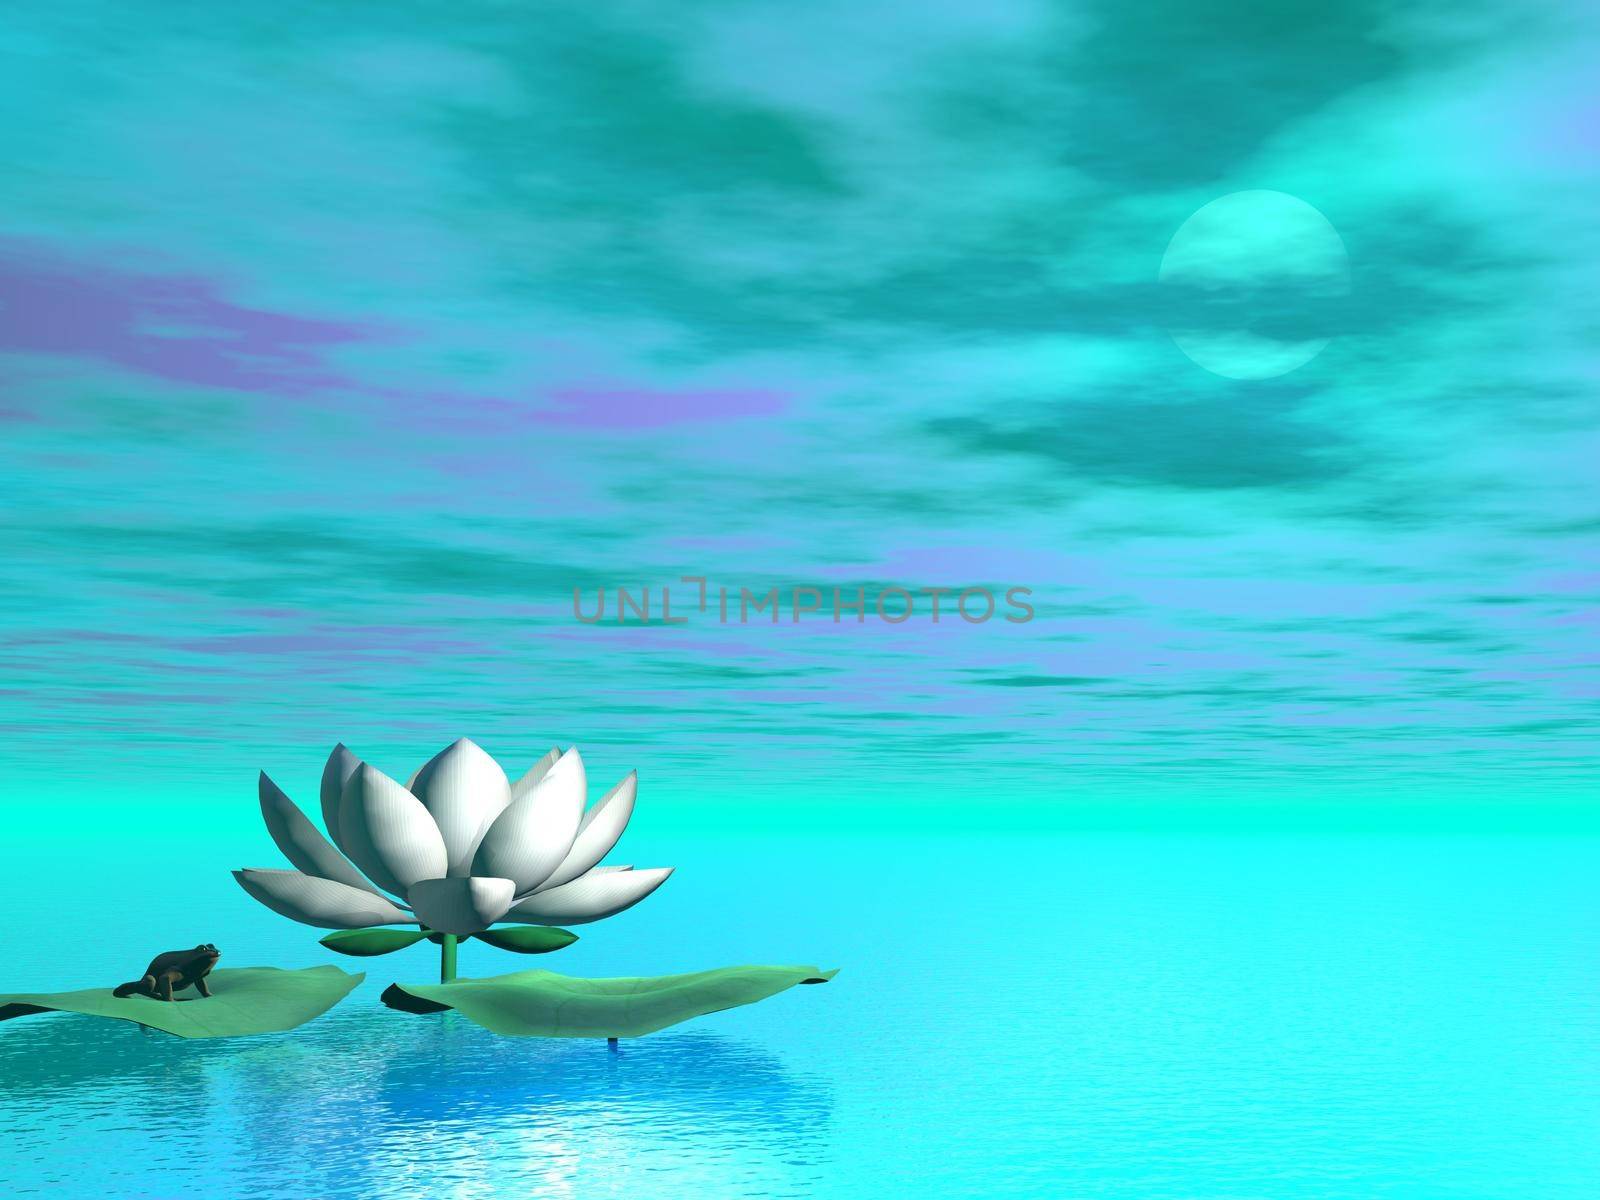 White lily flower next to leaves and frog in turquoise background